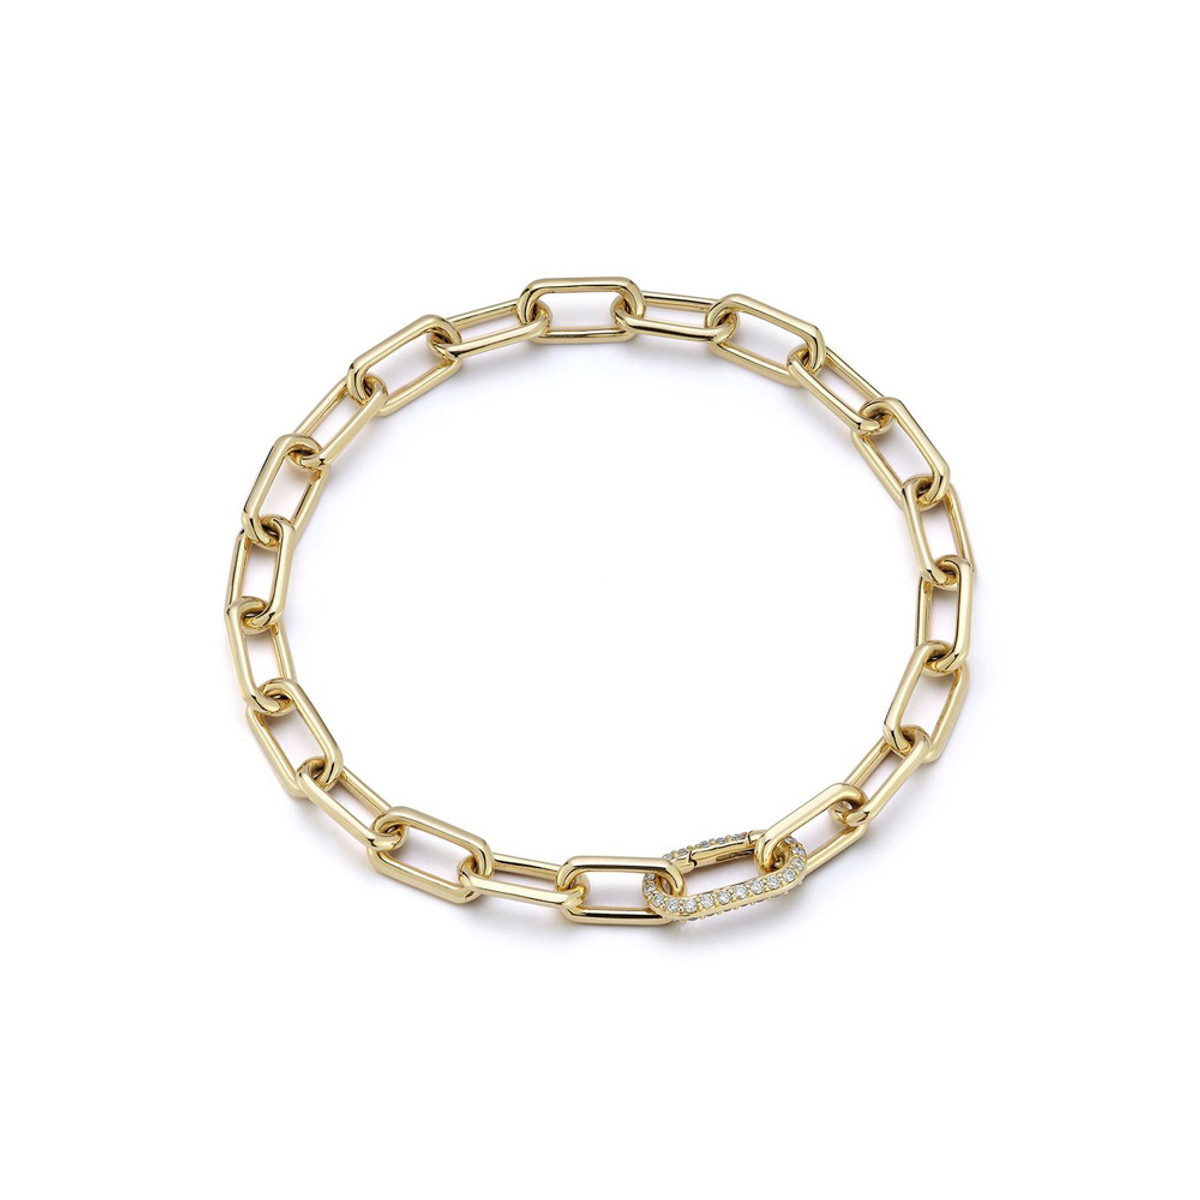 Walters Faith Saxon 18K Yellow Gold Chain Link Bracelet with Diamond Elongated Spring Loaded Clasp-56174 Product Image